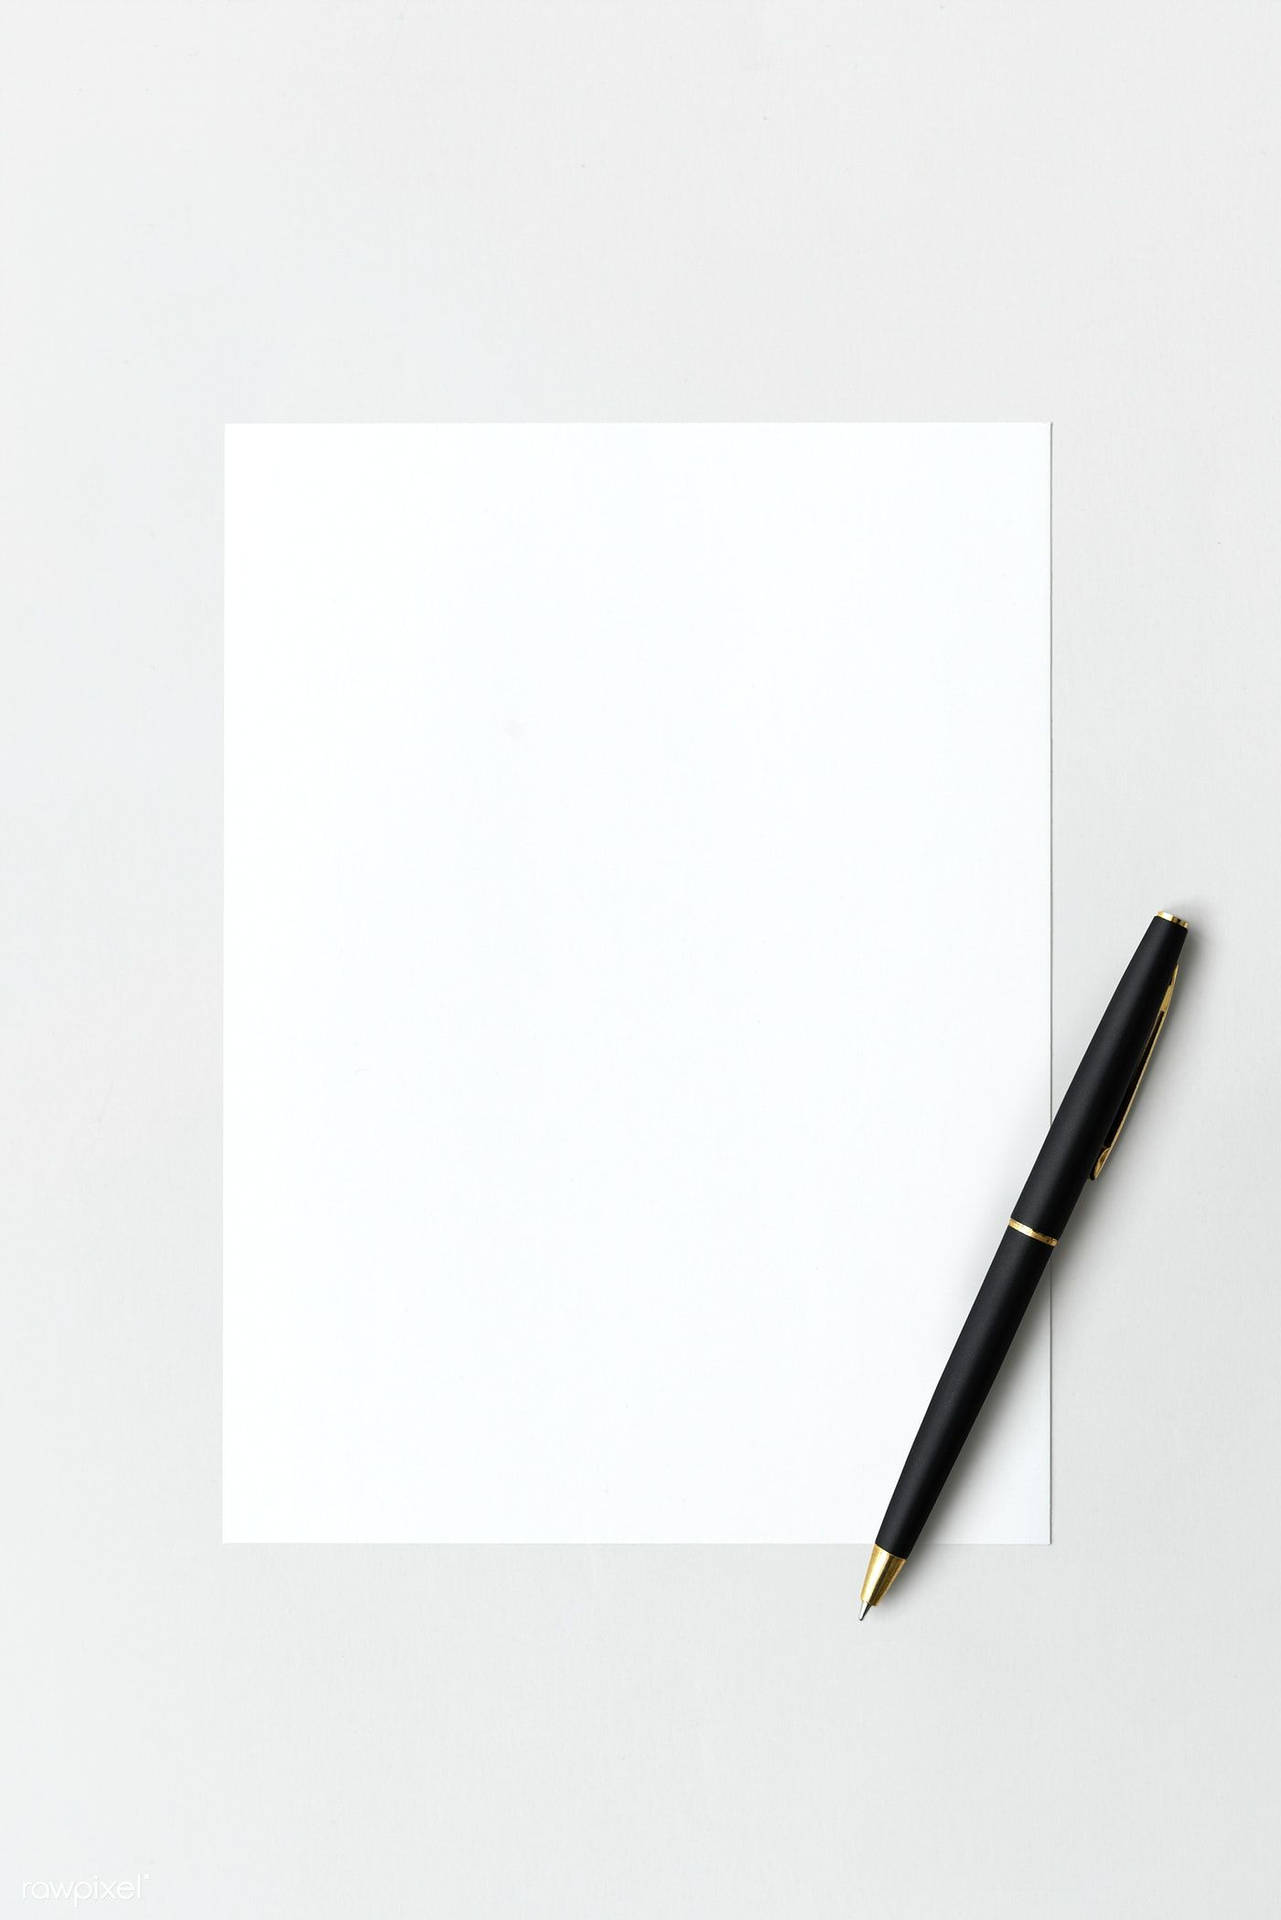 Blank White Paper And Pen Background